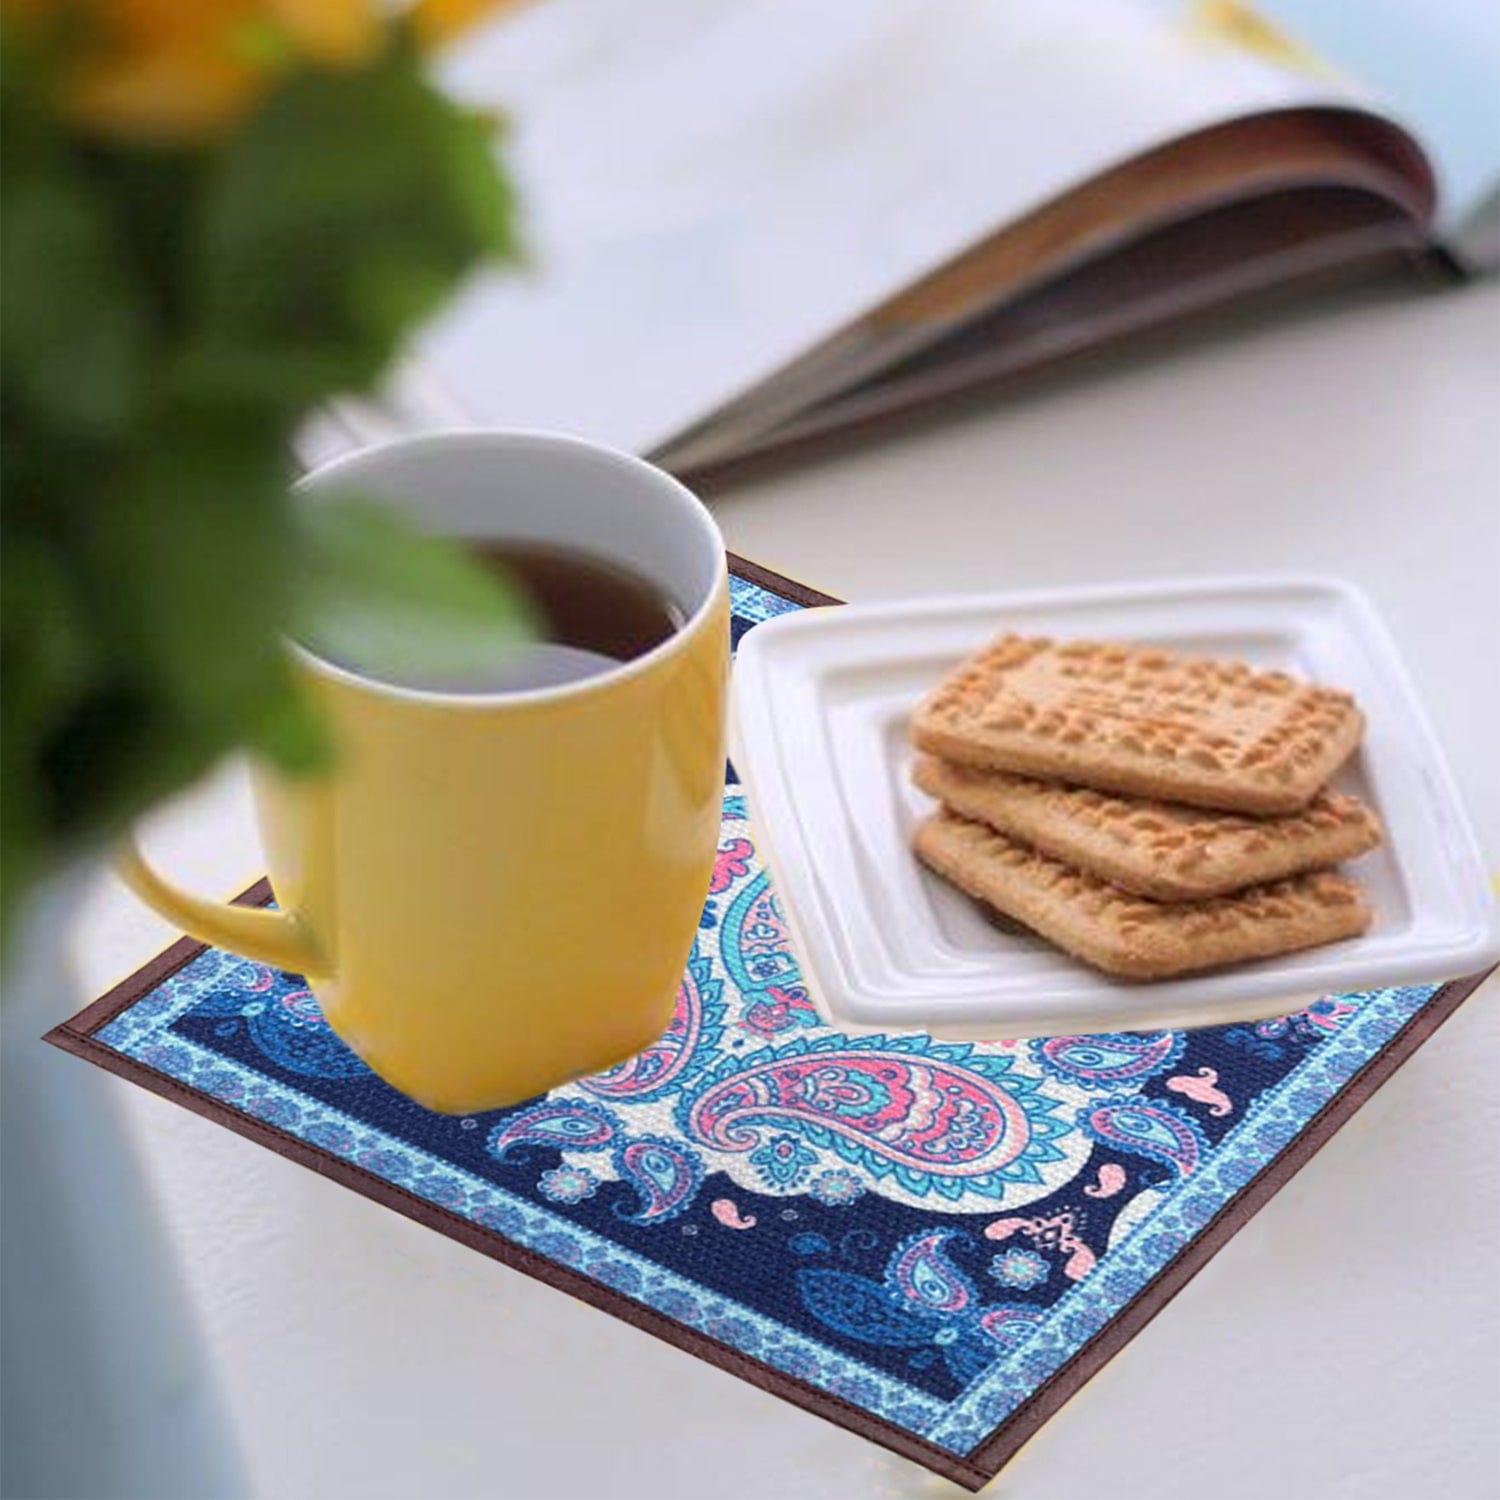 Mona B Set of 2 Printed Placemats, 13 INCH Square, Best for Bed-Side Table/Center Table, Dining Table/Shelves- PP-102 - Placemat by Mona-B - Backpack, Flat30, New Arrivals, Sale, Shop1999, Shop2999, Shop3999